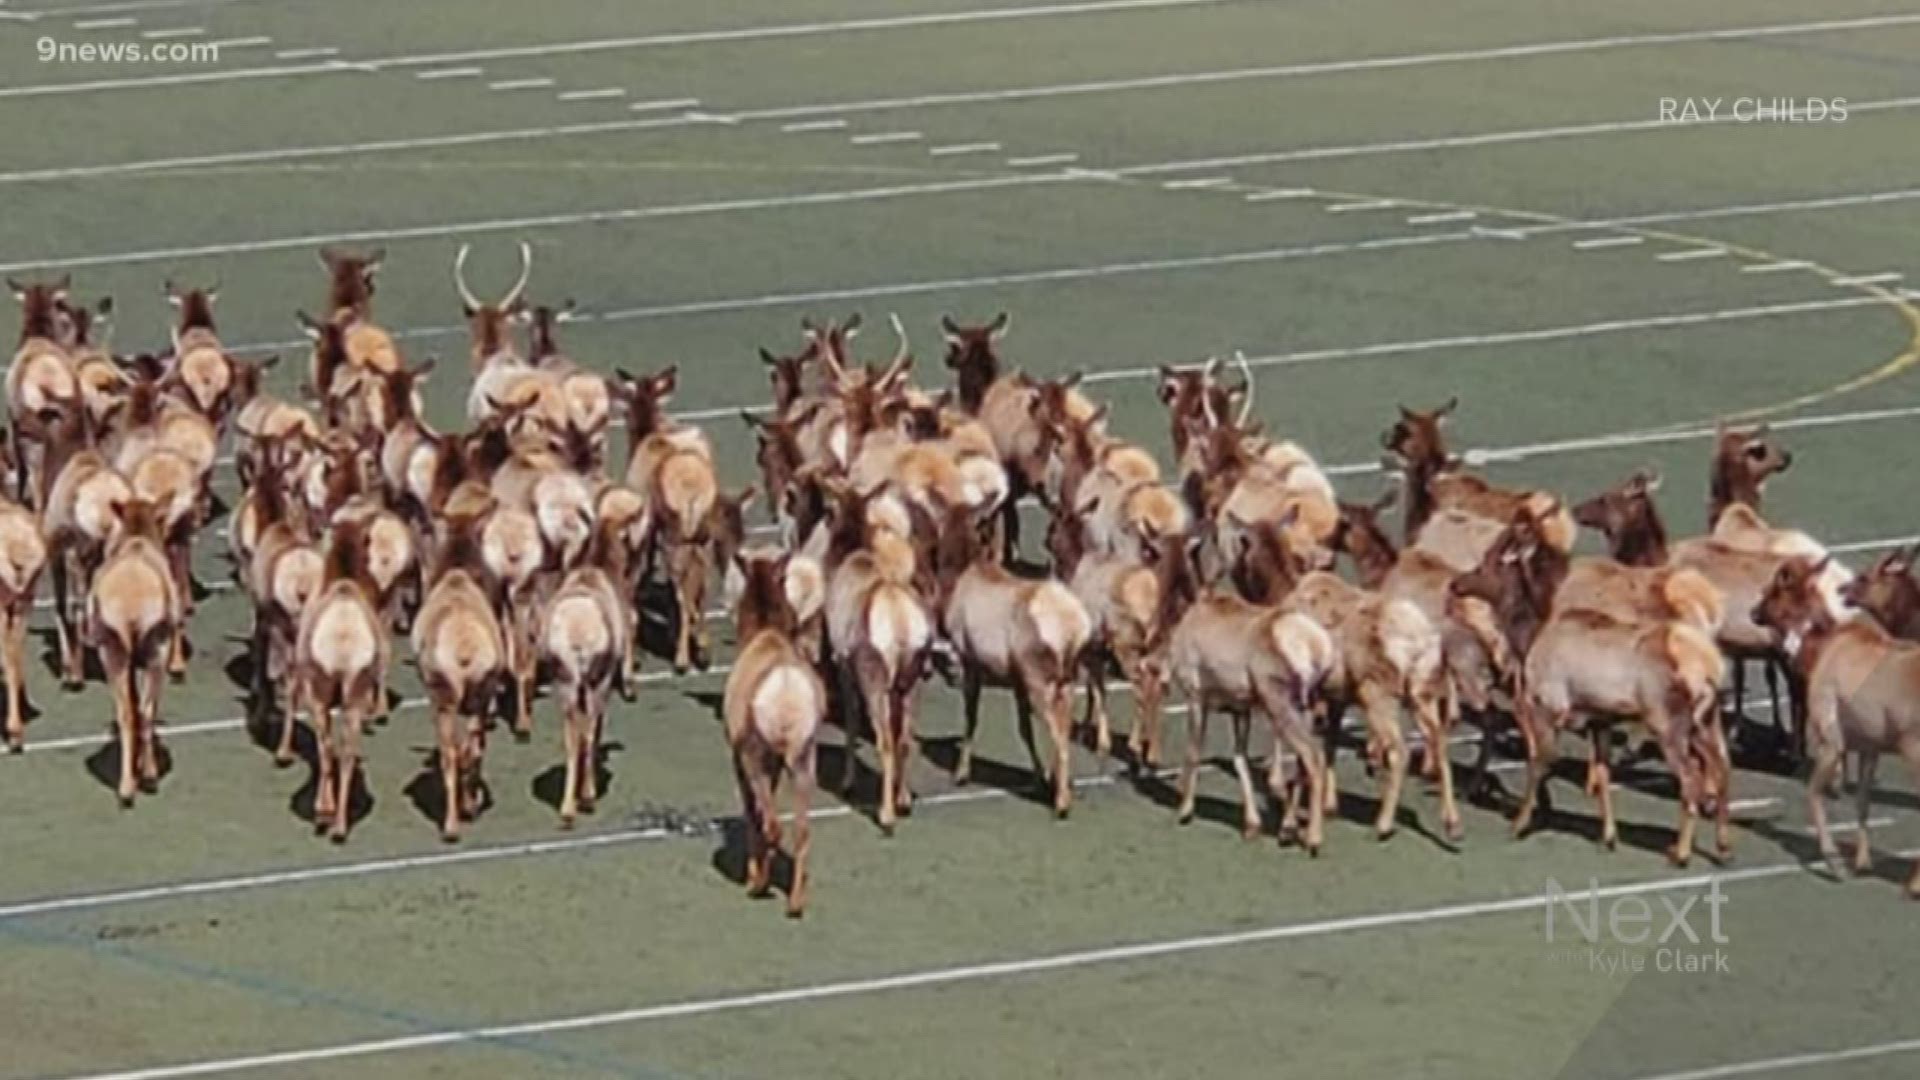 The herd was spotted hanging out on the turf at Golden High School.